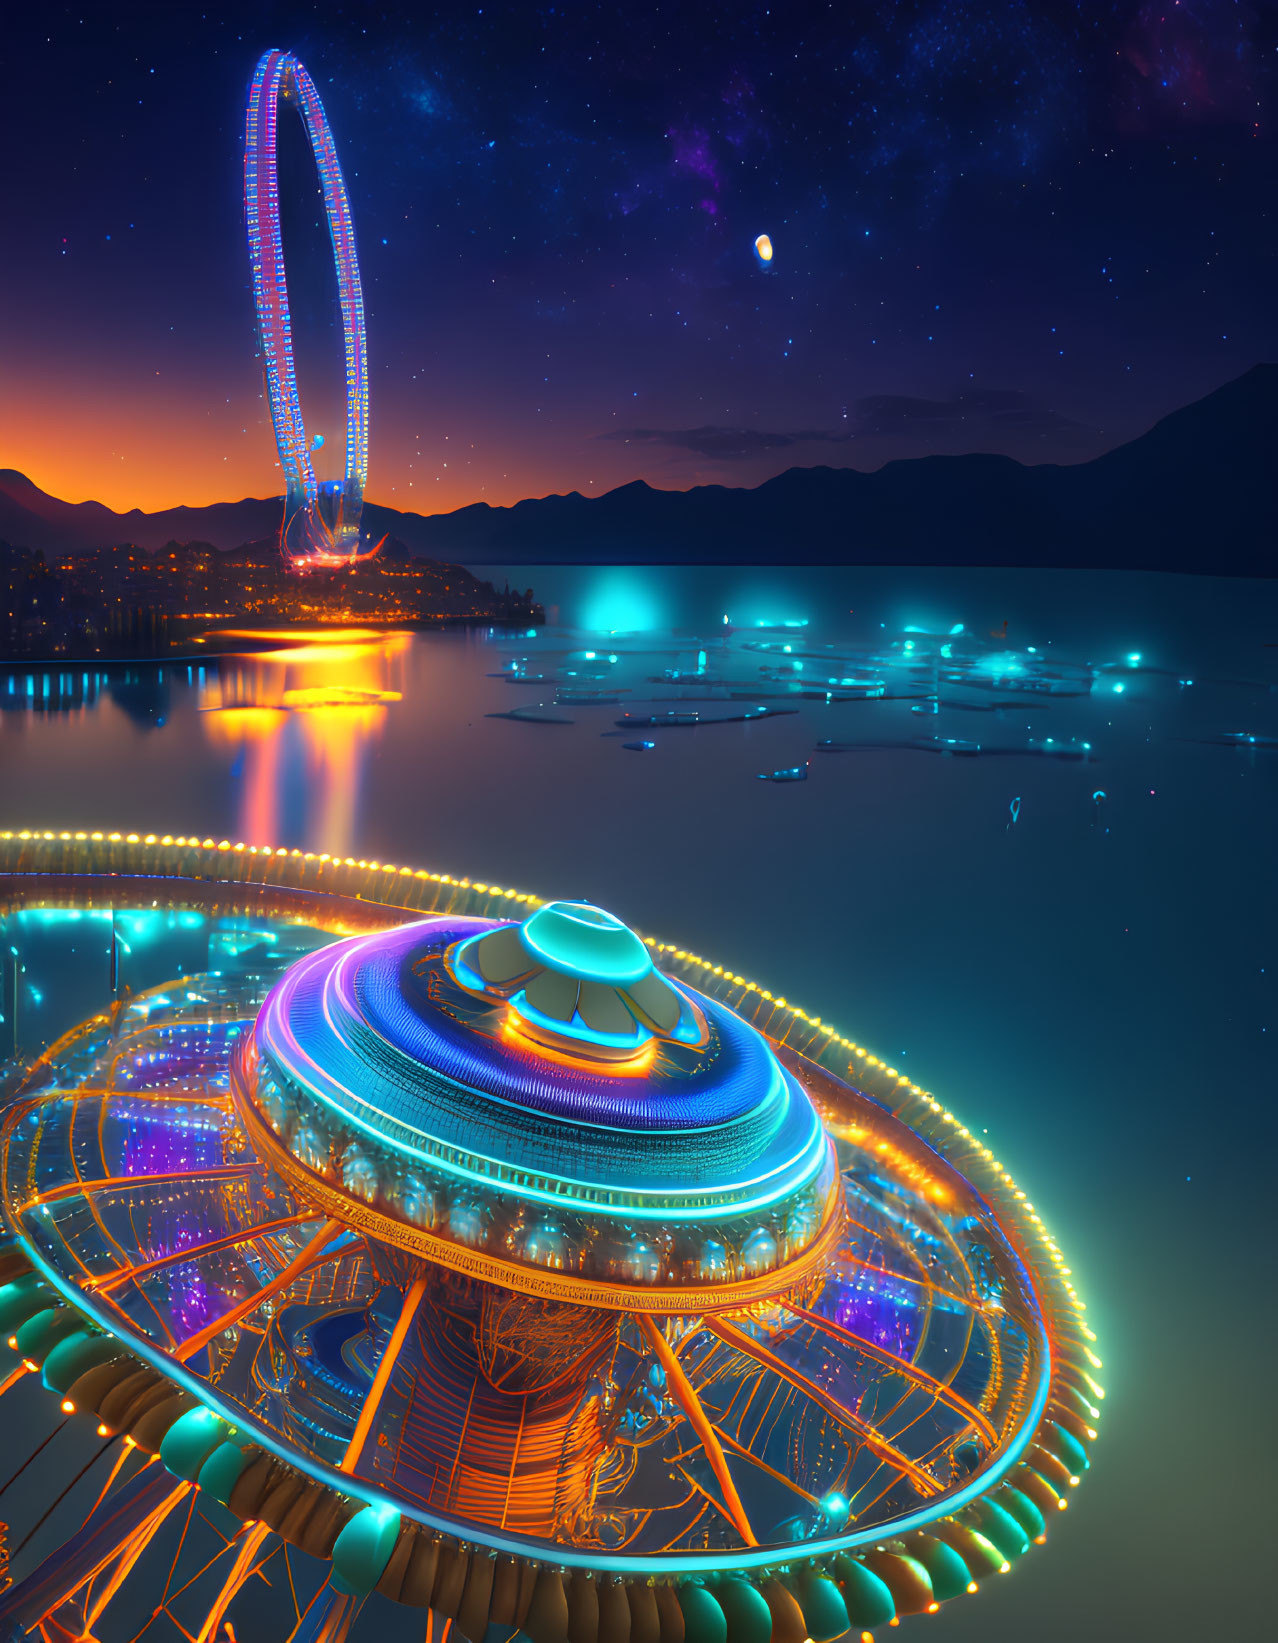 Futuristic neon-lit cityscape with glowing ferris wheel at night